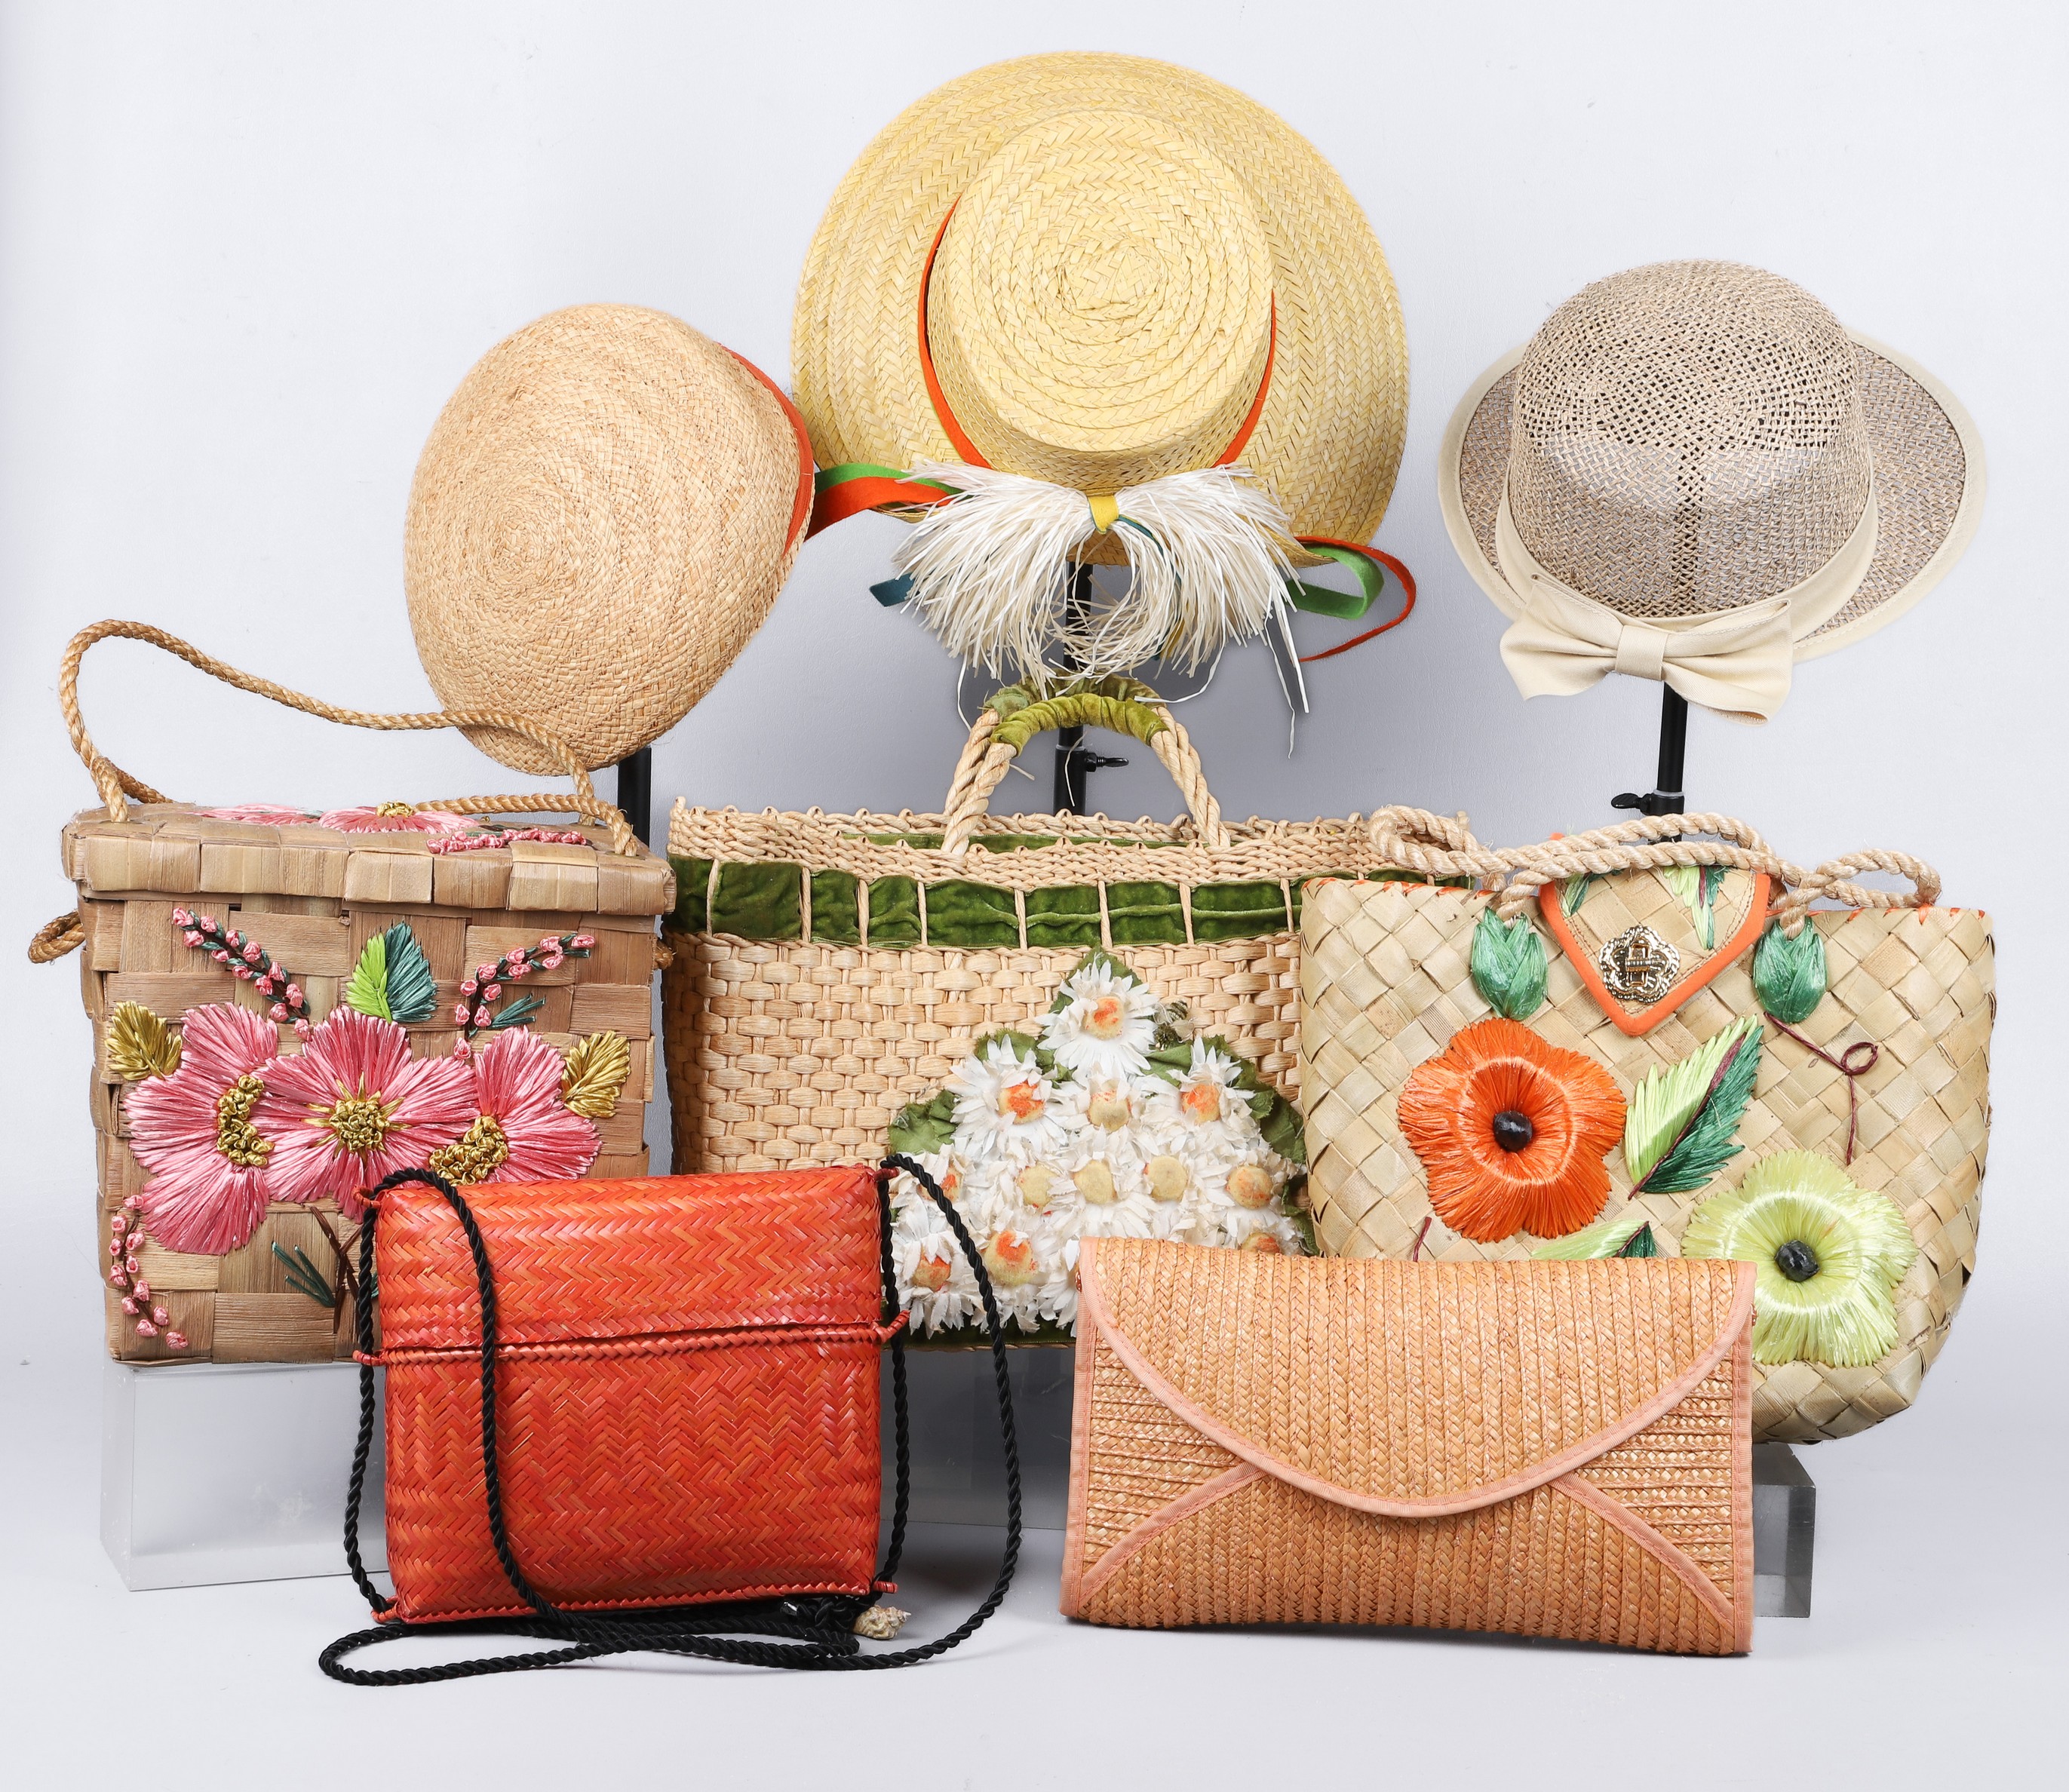  8 1960 s woven straw hats and 27a6ae